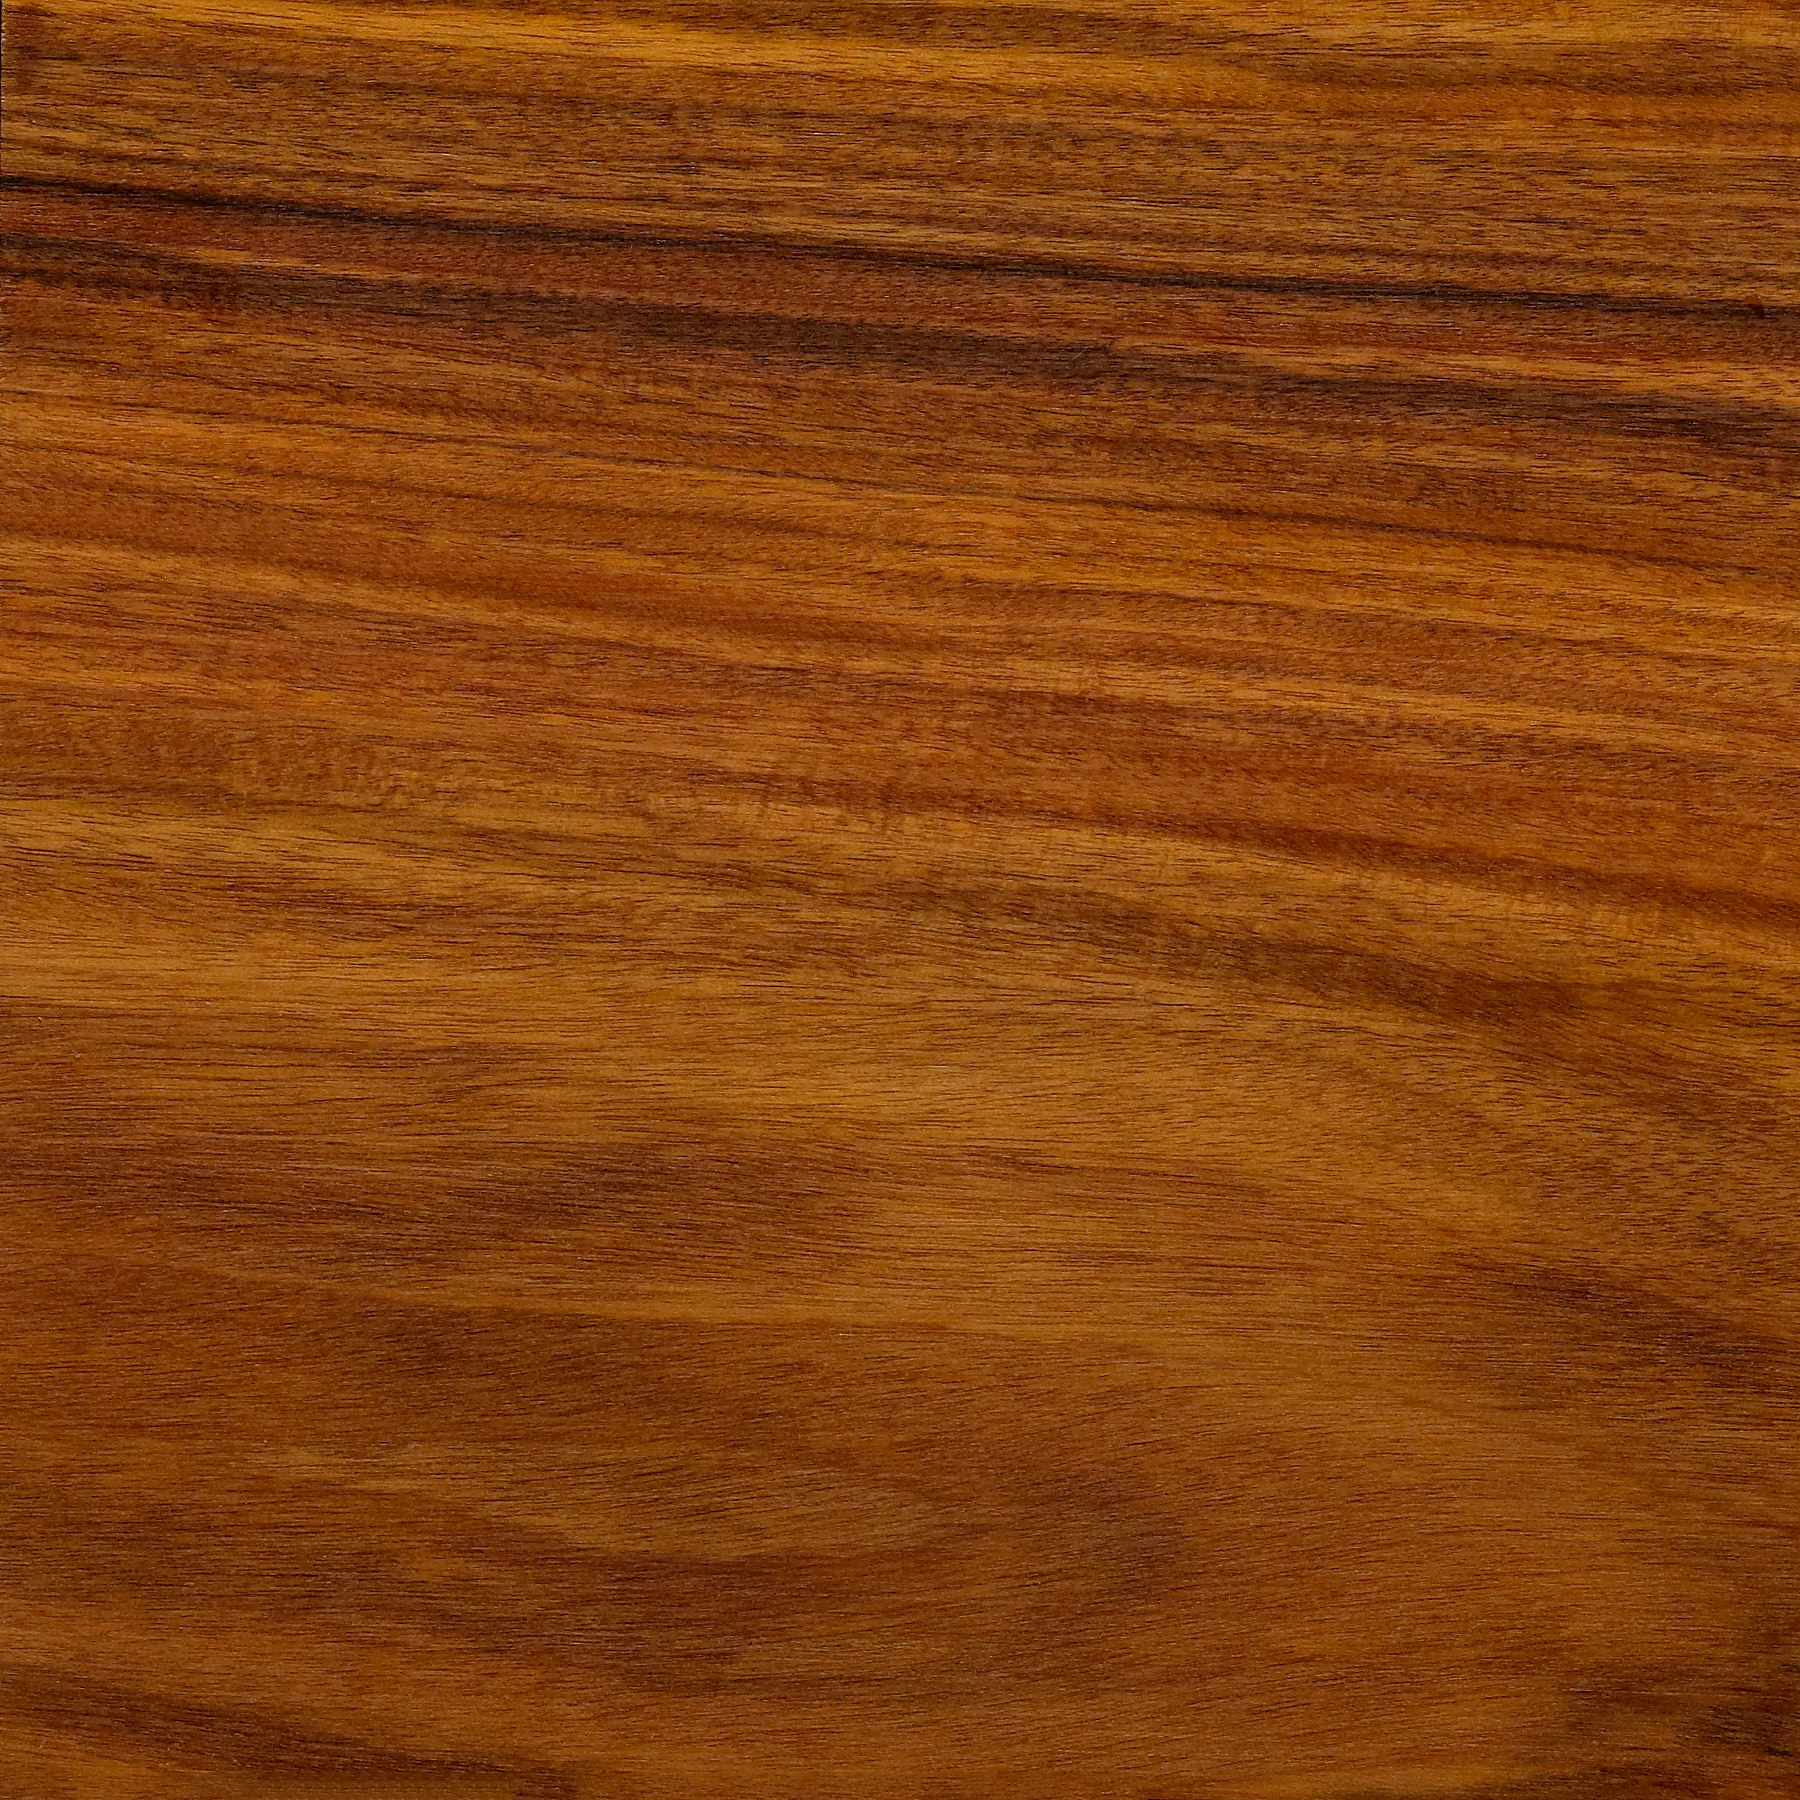 A close up view of Wood & Veneer Oiled Walnut 5Q.